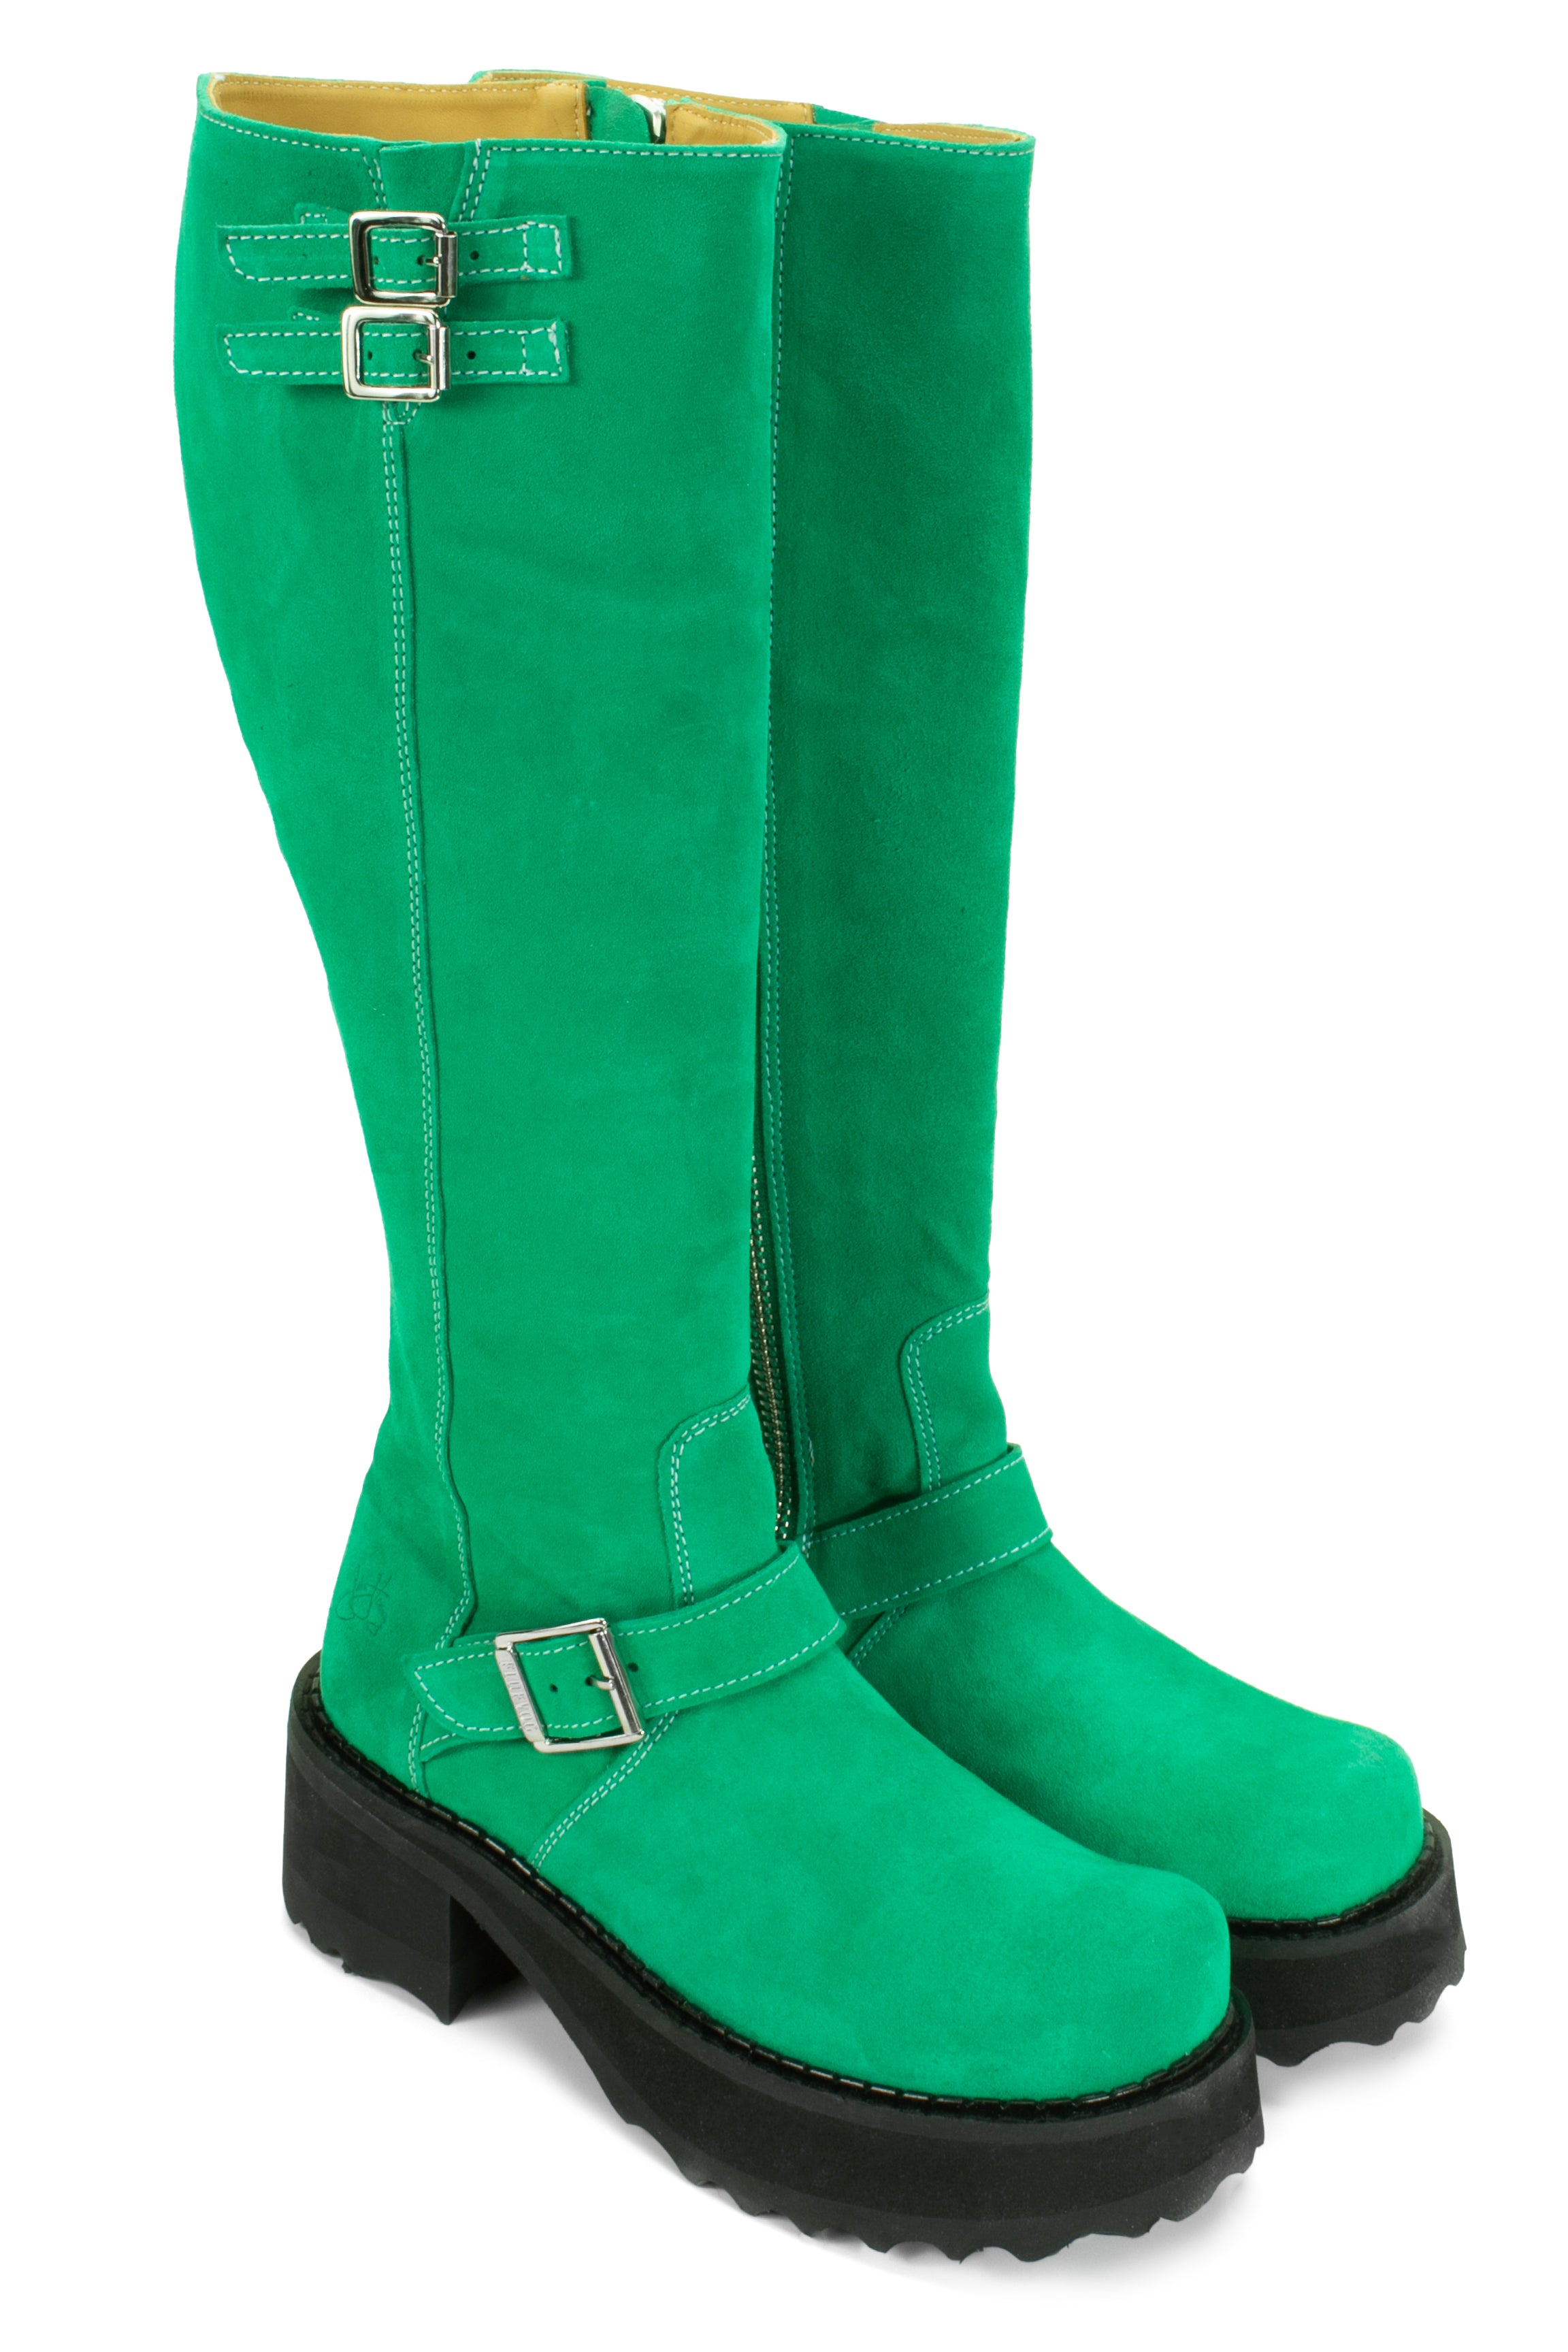 Boot in green, under-the-knee-high, suede boot, 2 buckles at top, 1 on foot with large belt heel height of 1.5"